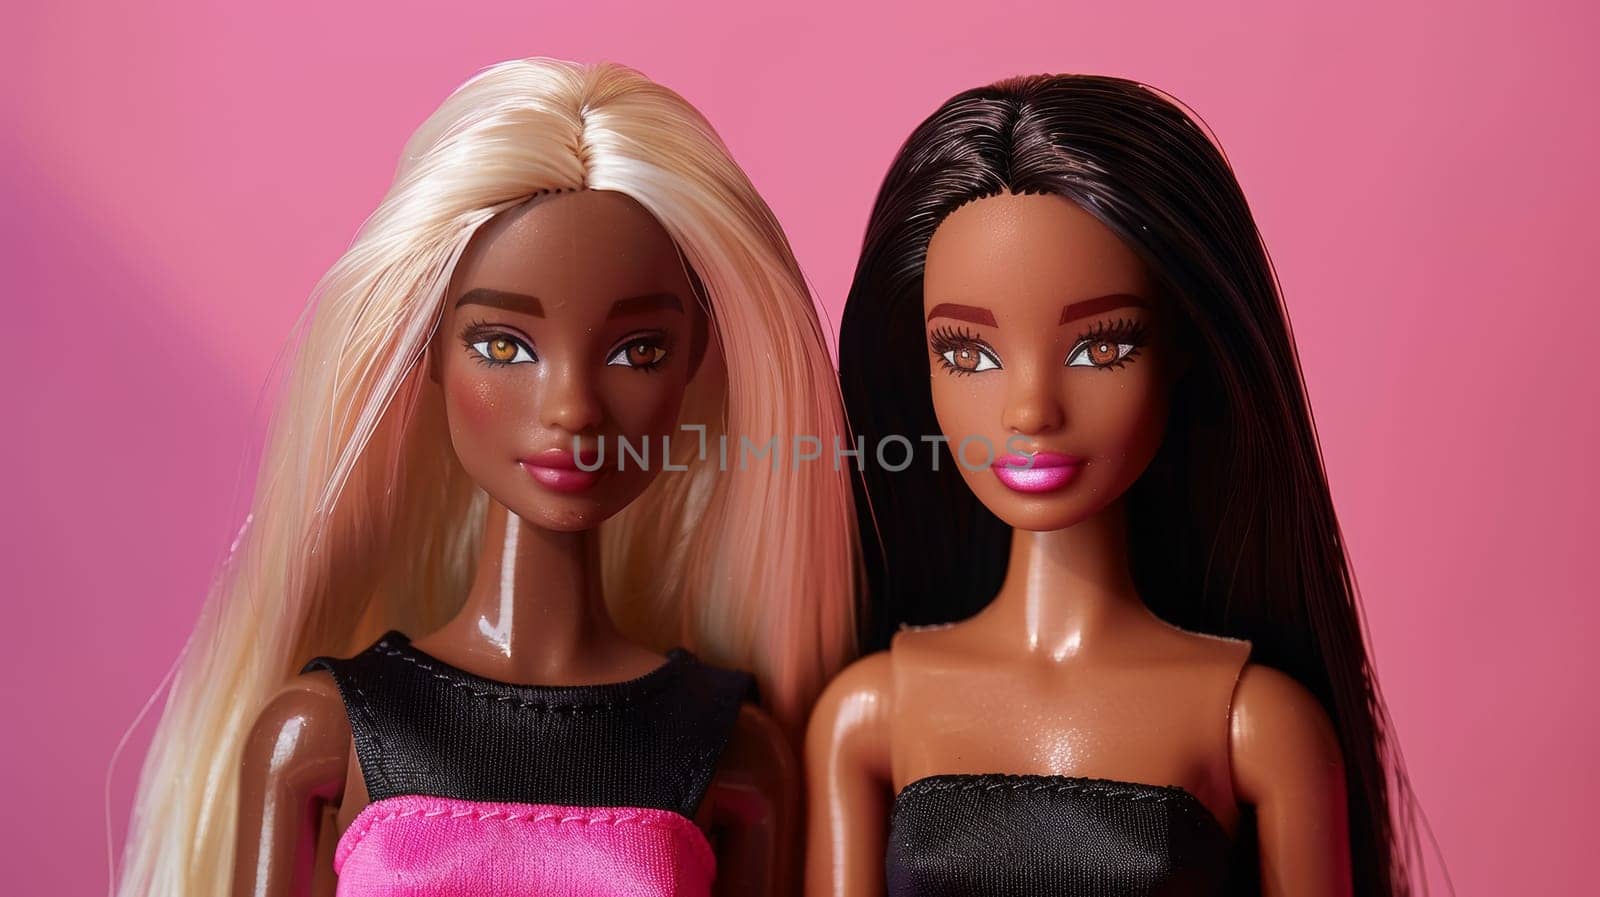 Two dolls with long blonde hair and black dresses are posed